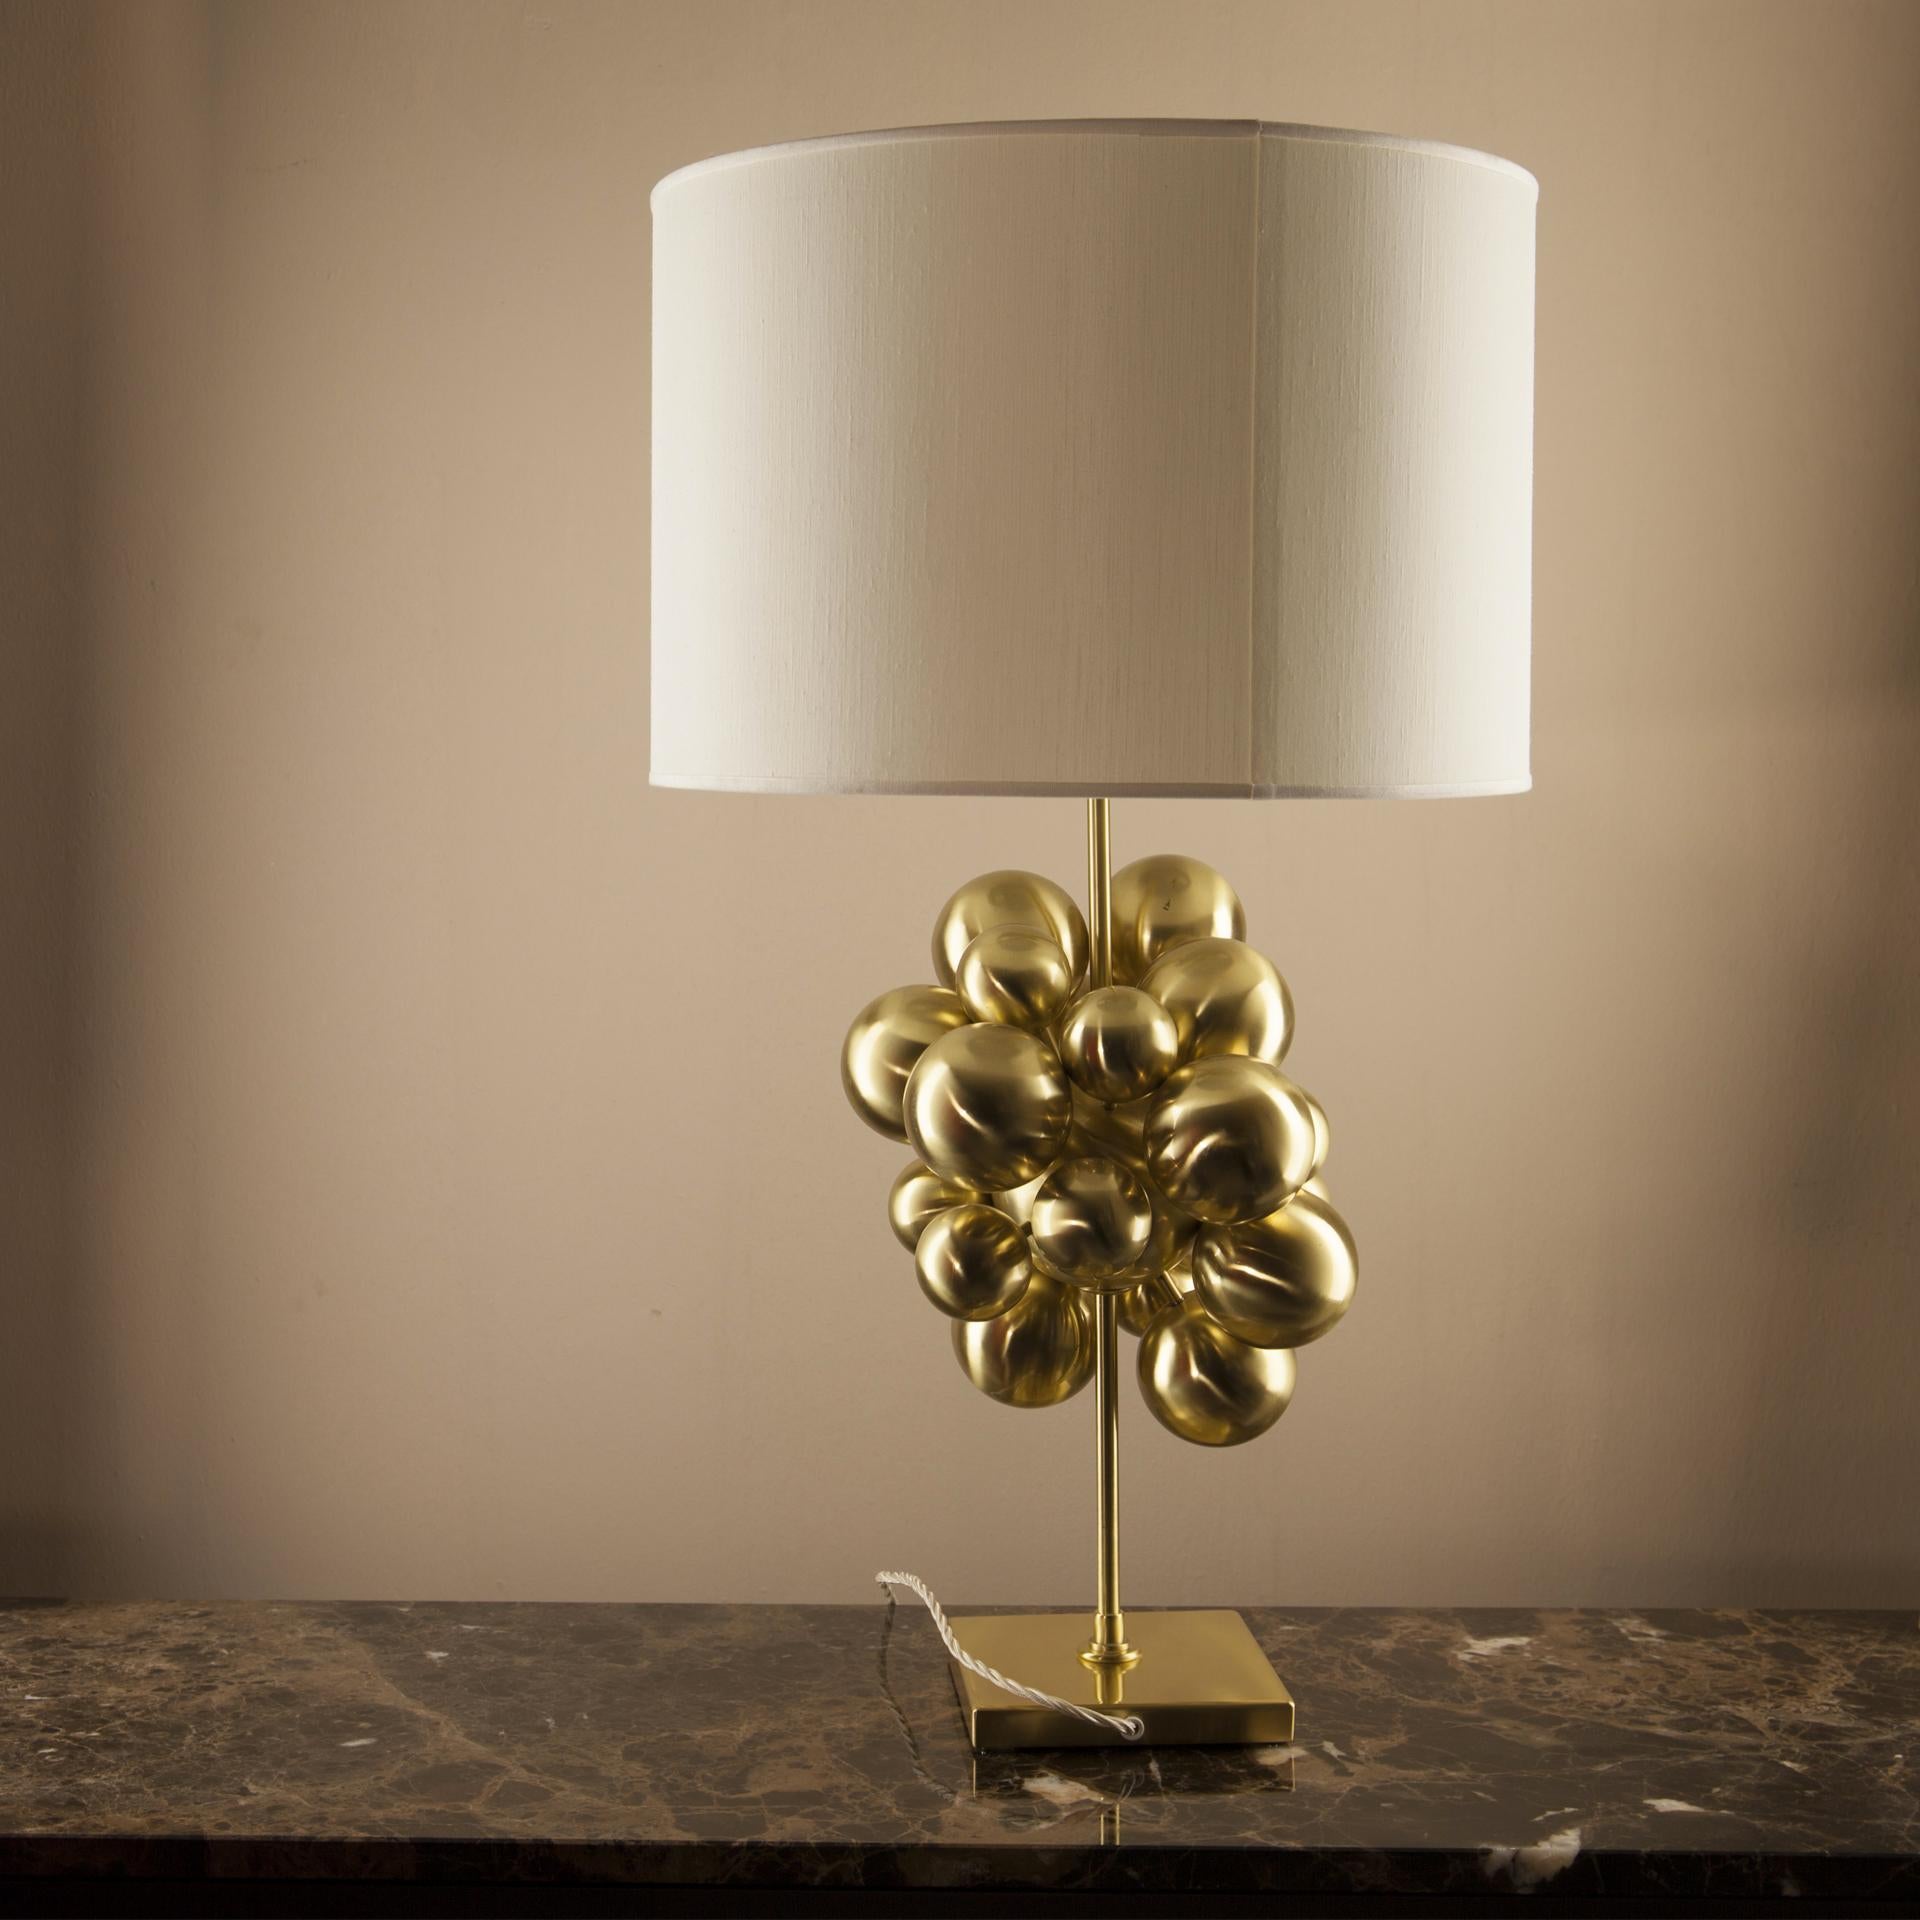 Plutone Table Lamp, Solid Brass Spheres, Florence Italy Production For Sale 3